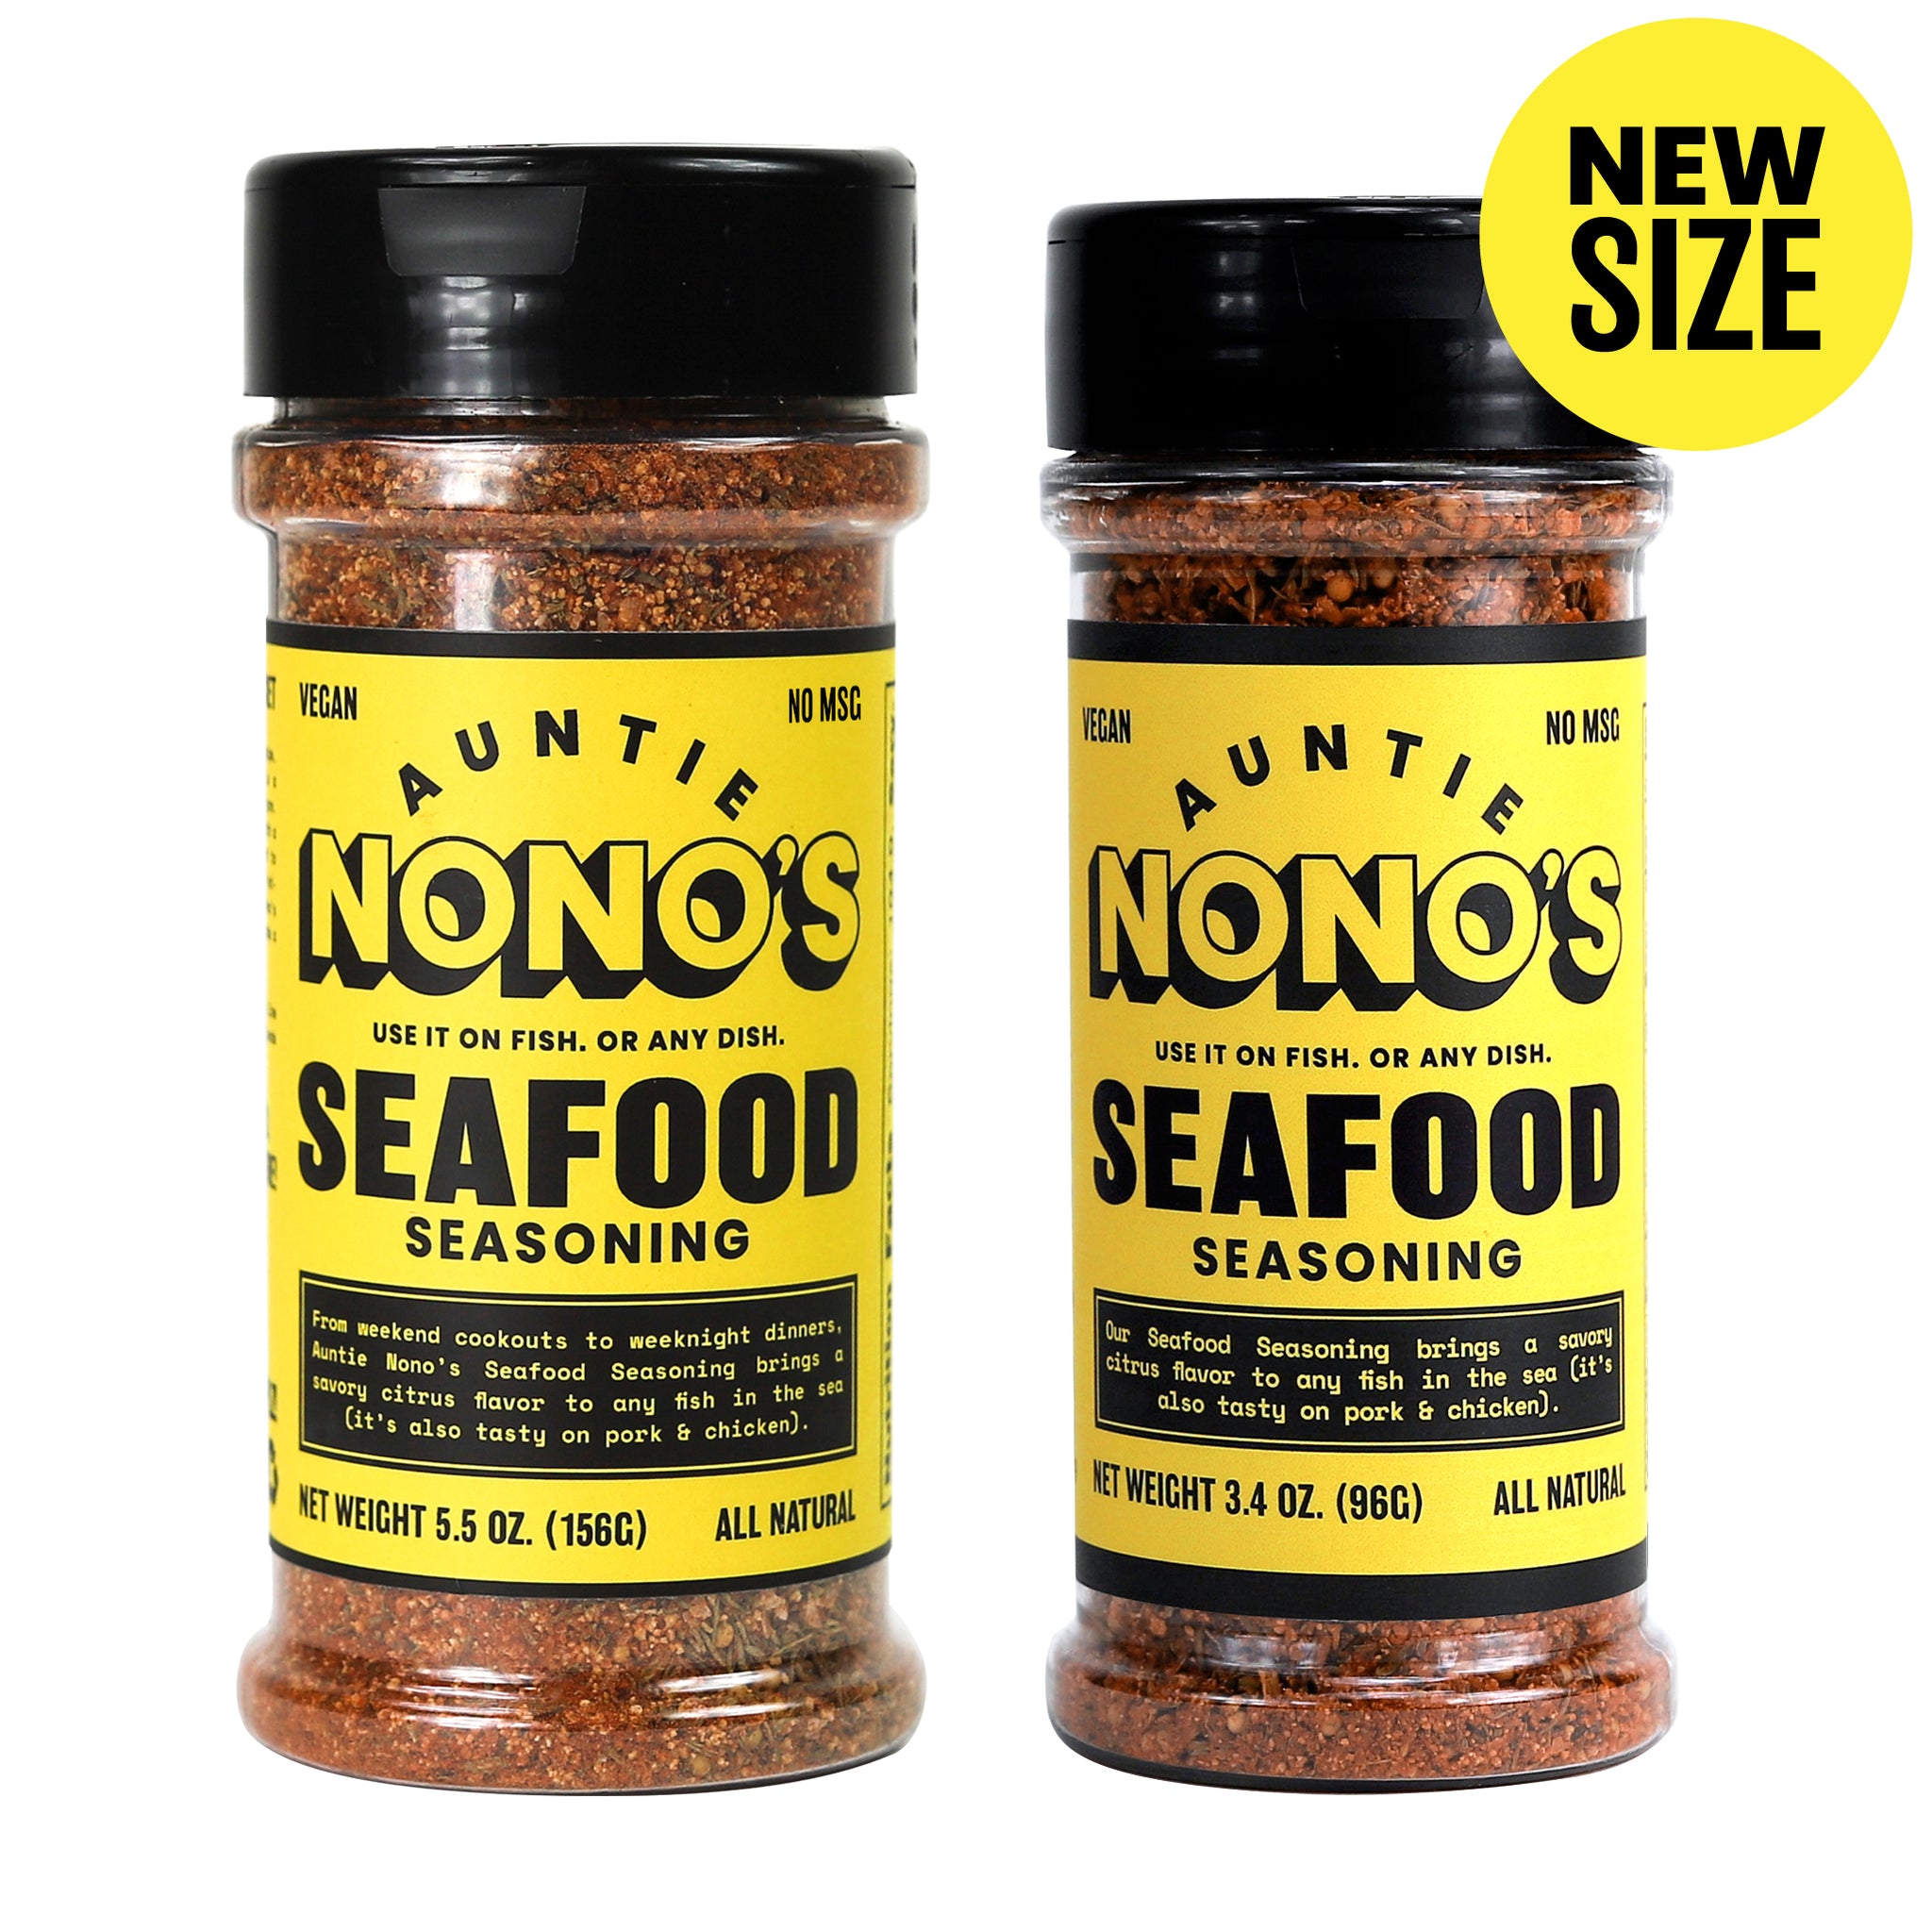 Auntie Nono's All-Natural Seafood Seasoning - Savory 5.5 ounce (Pack of 1)